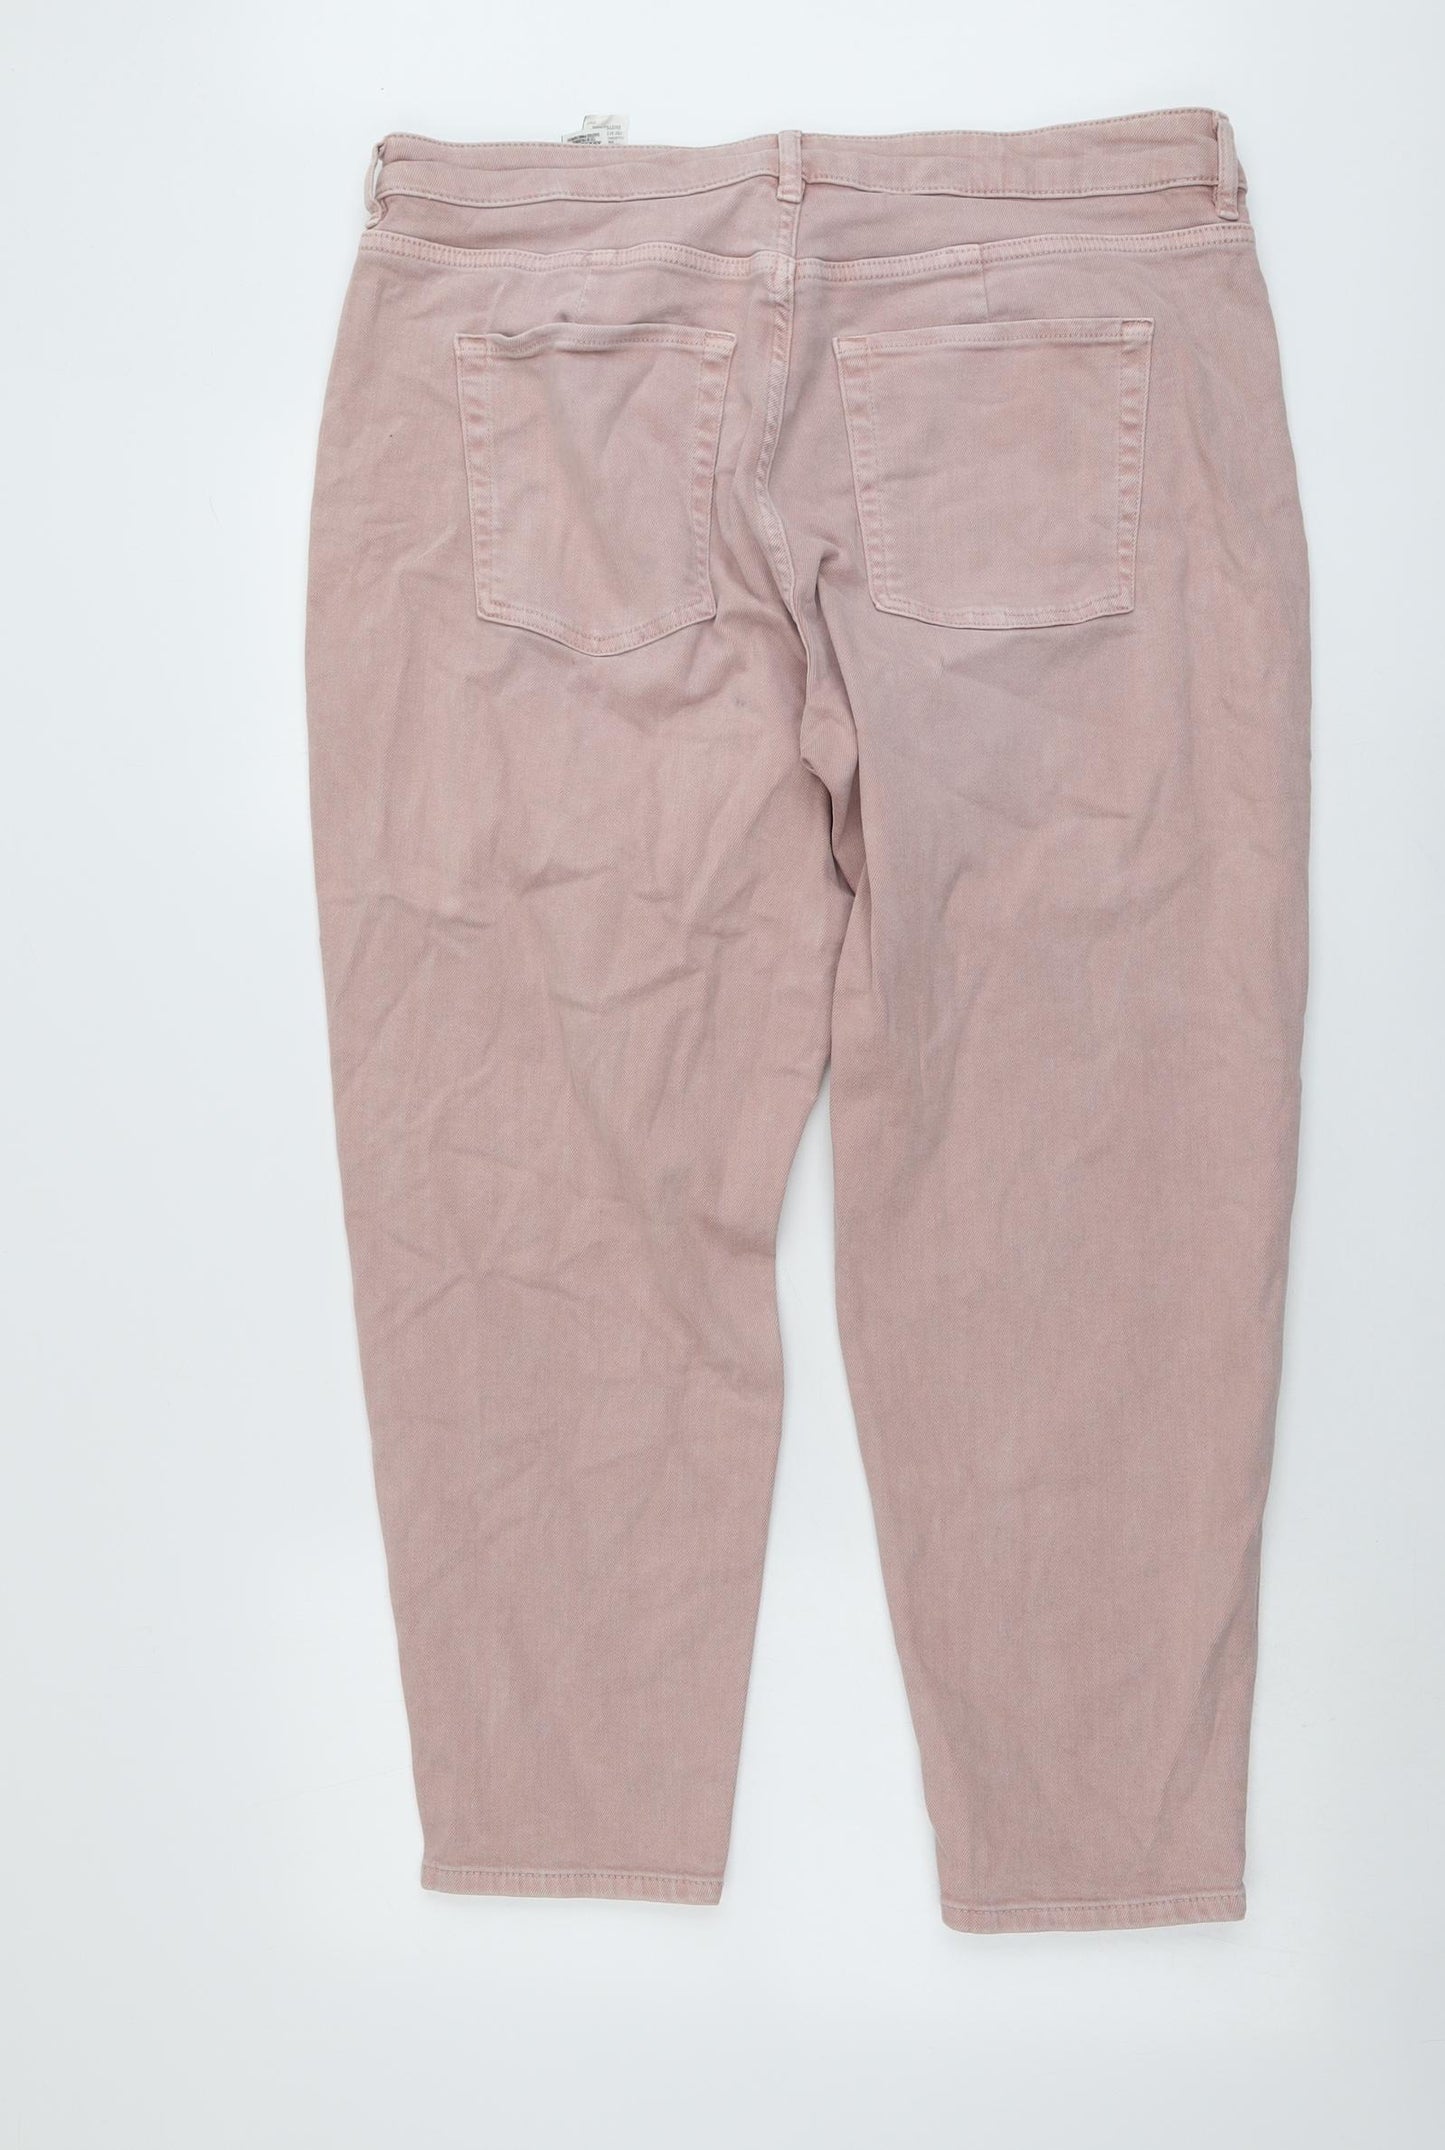 Marks and Spencer Womens Pink Cotton Mom Jeans Size 18 L26 in Regular Button